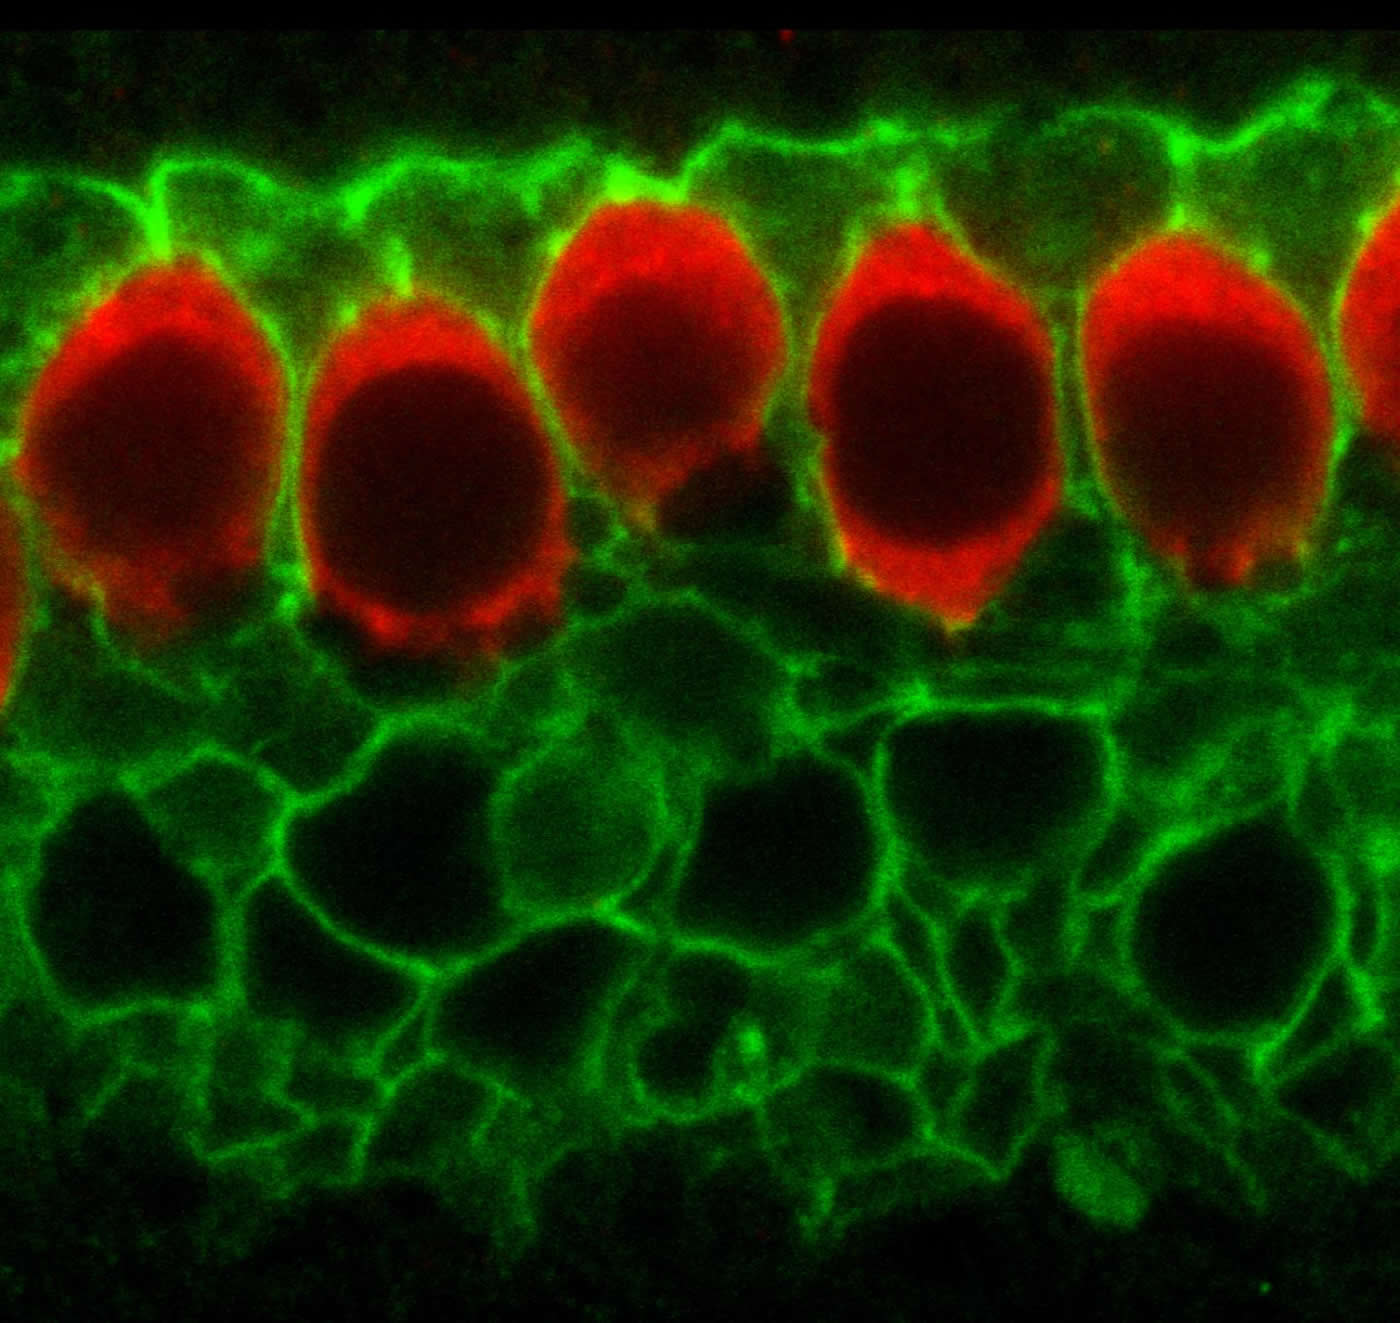 Image shows a cross section of the sensory epithelium of the developing inner ear in a mouse.